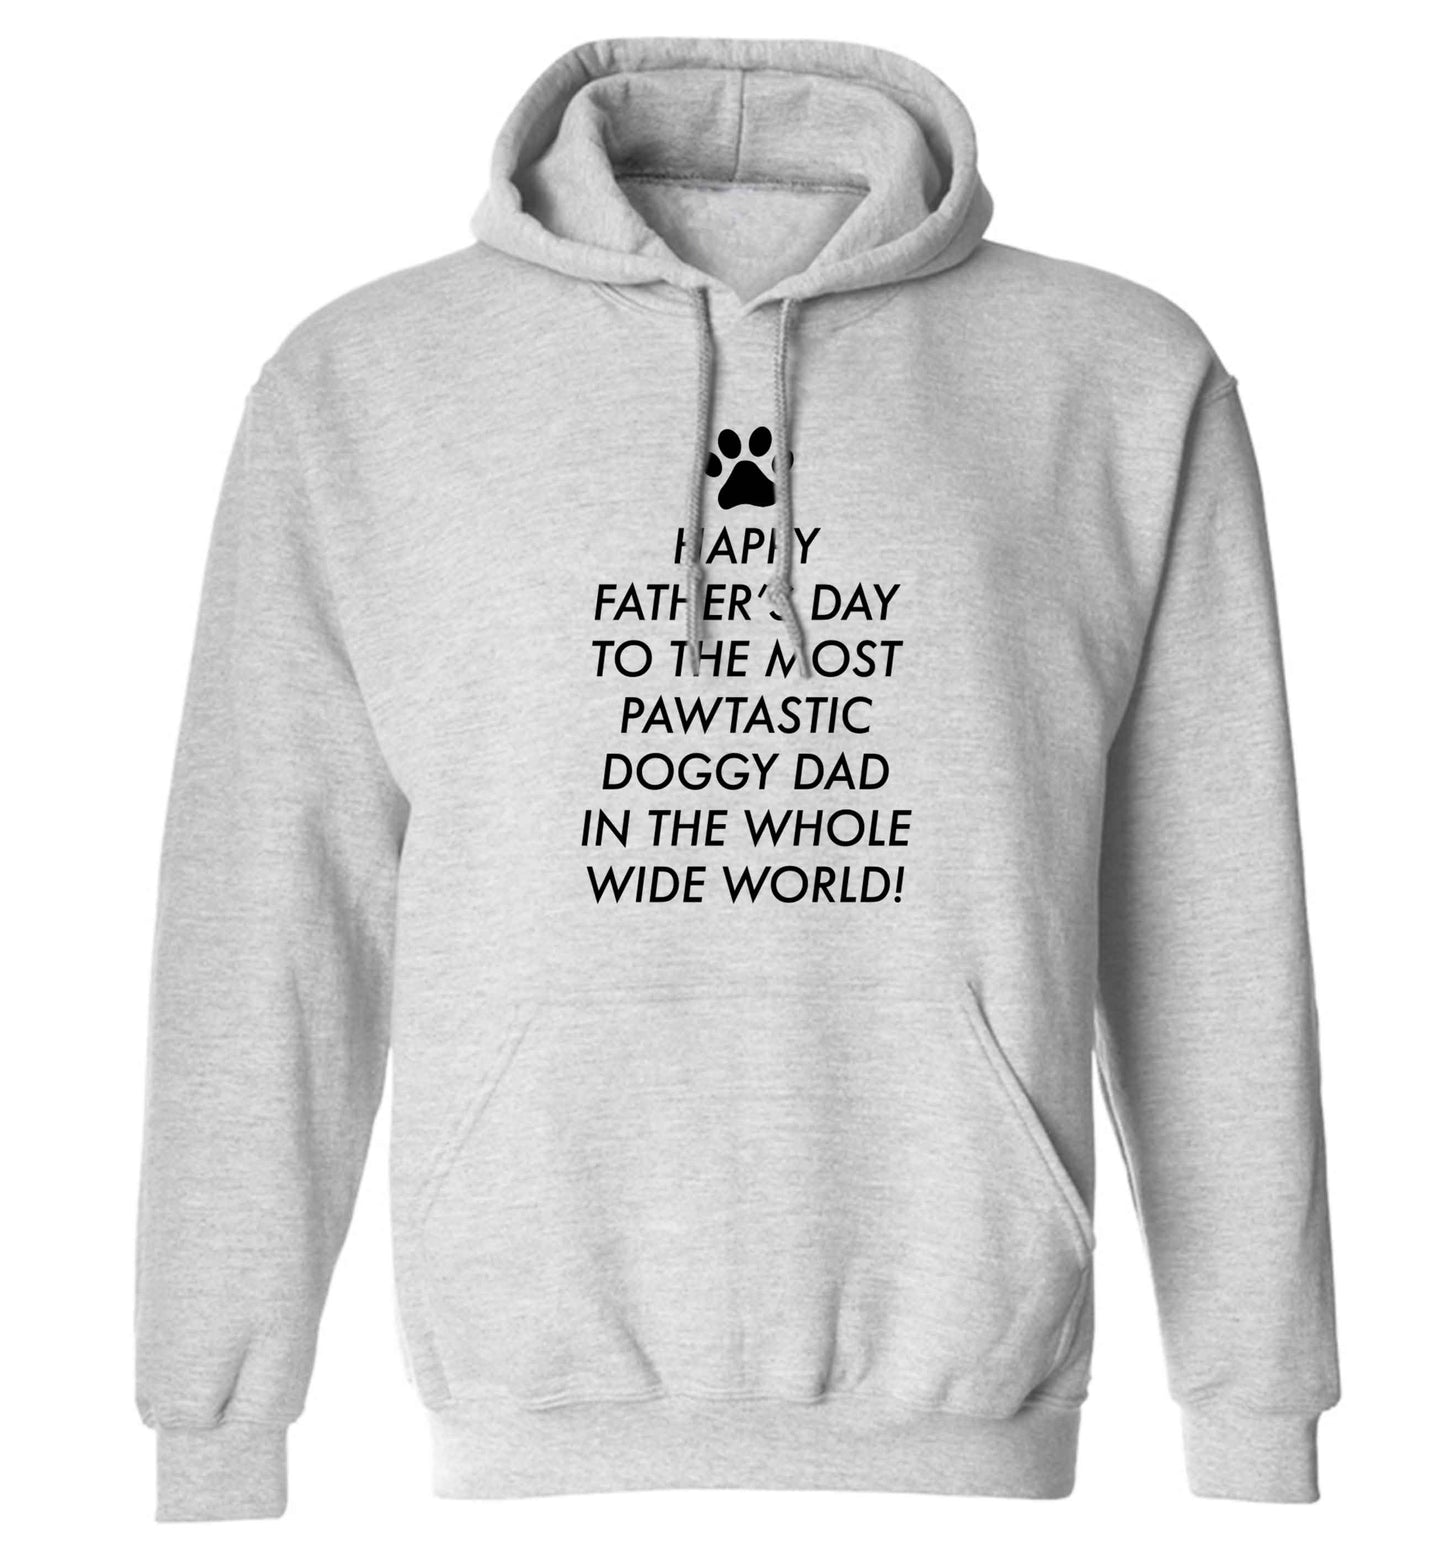 Happy Father's day to the most pawtastic doggy dad in the whole wide world!adults unisex grey hoodie 2XL